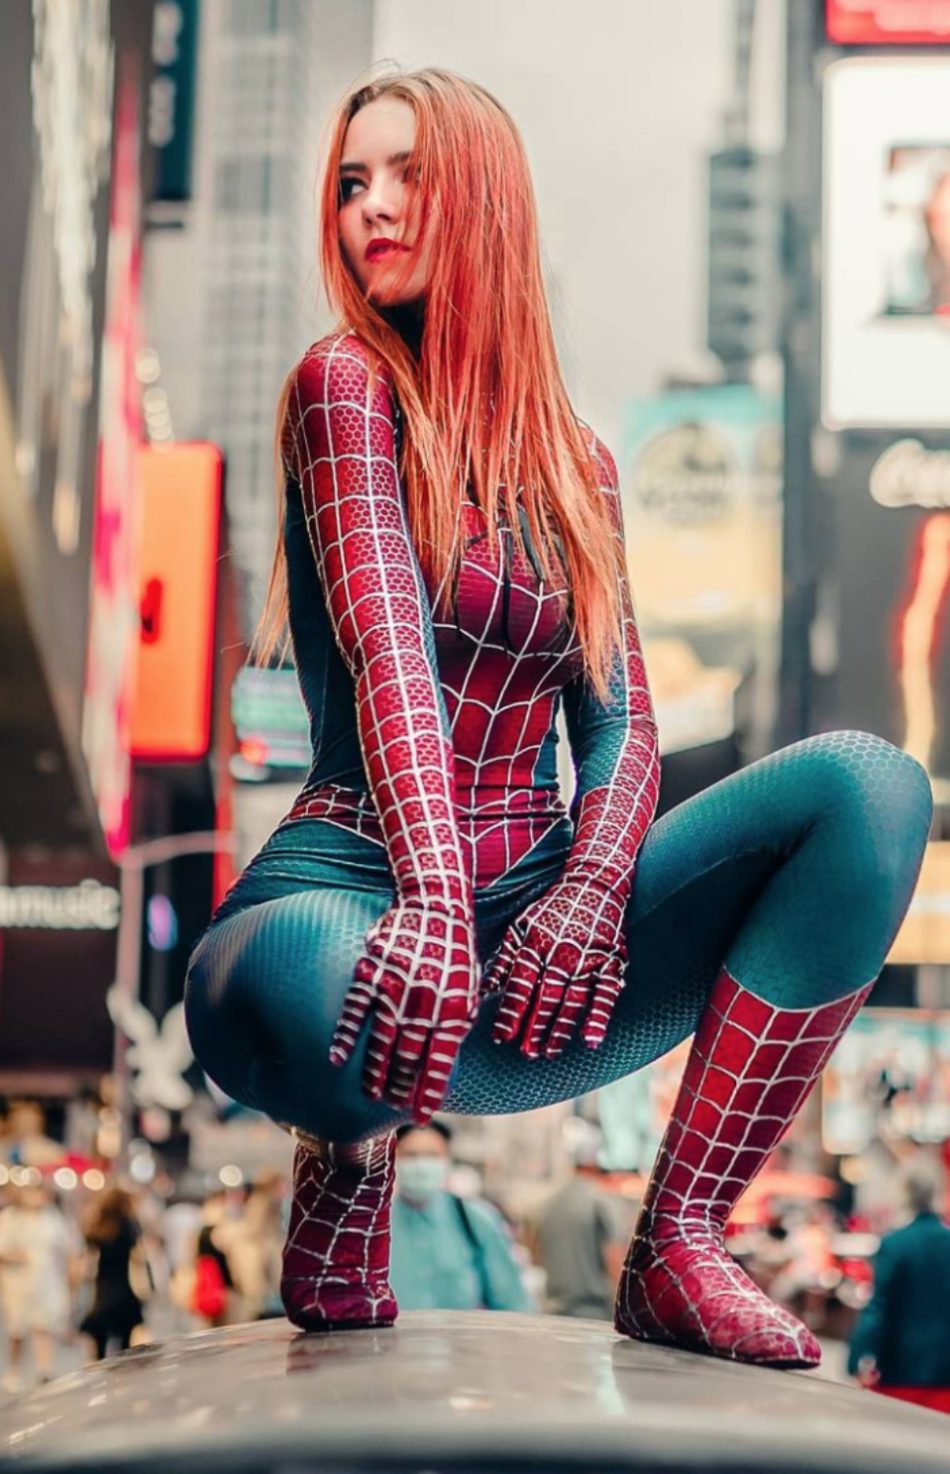 Sexy Red Hot Cosplay Girls Spiderman Women Best Photo Compilation 2021 (89 HQ Photos) 85